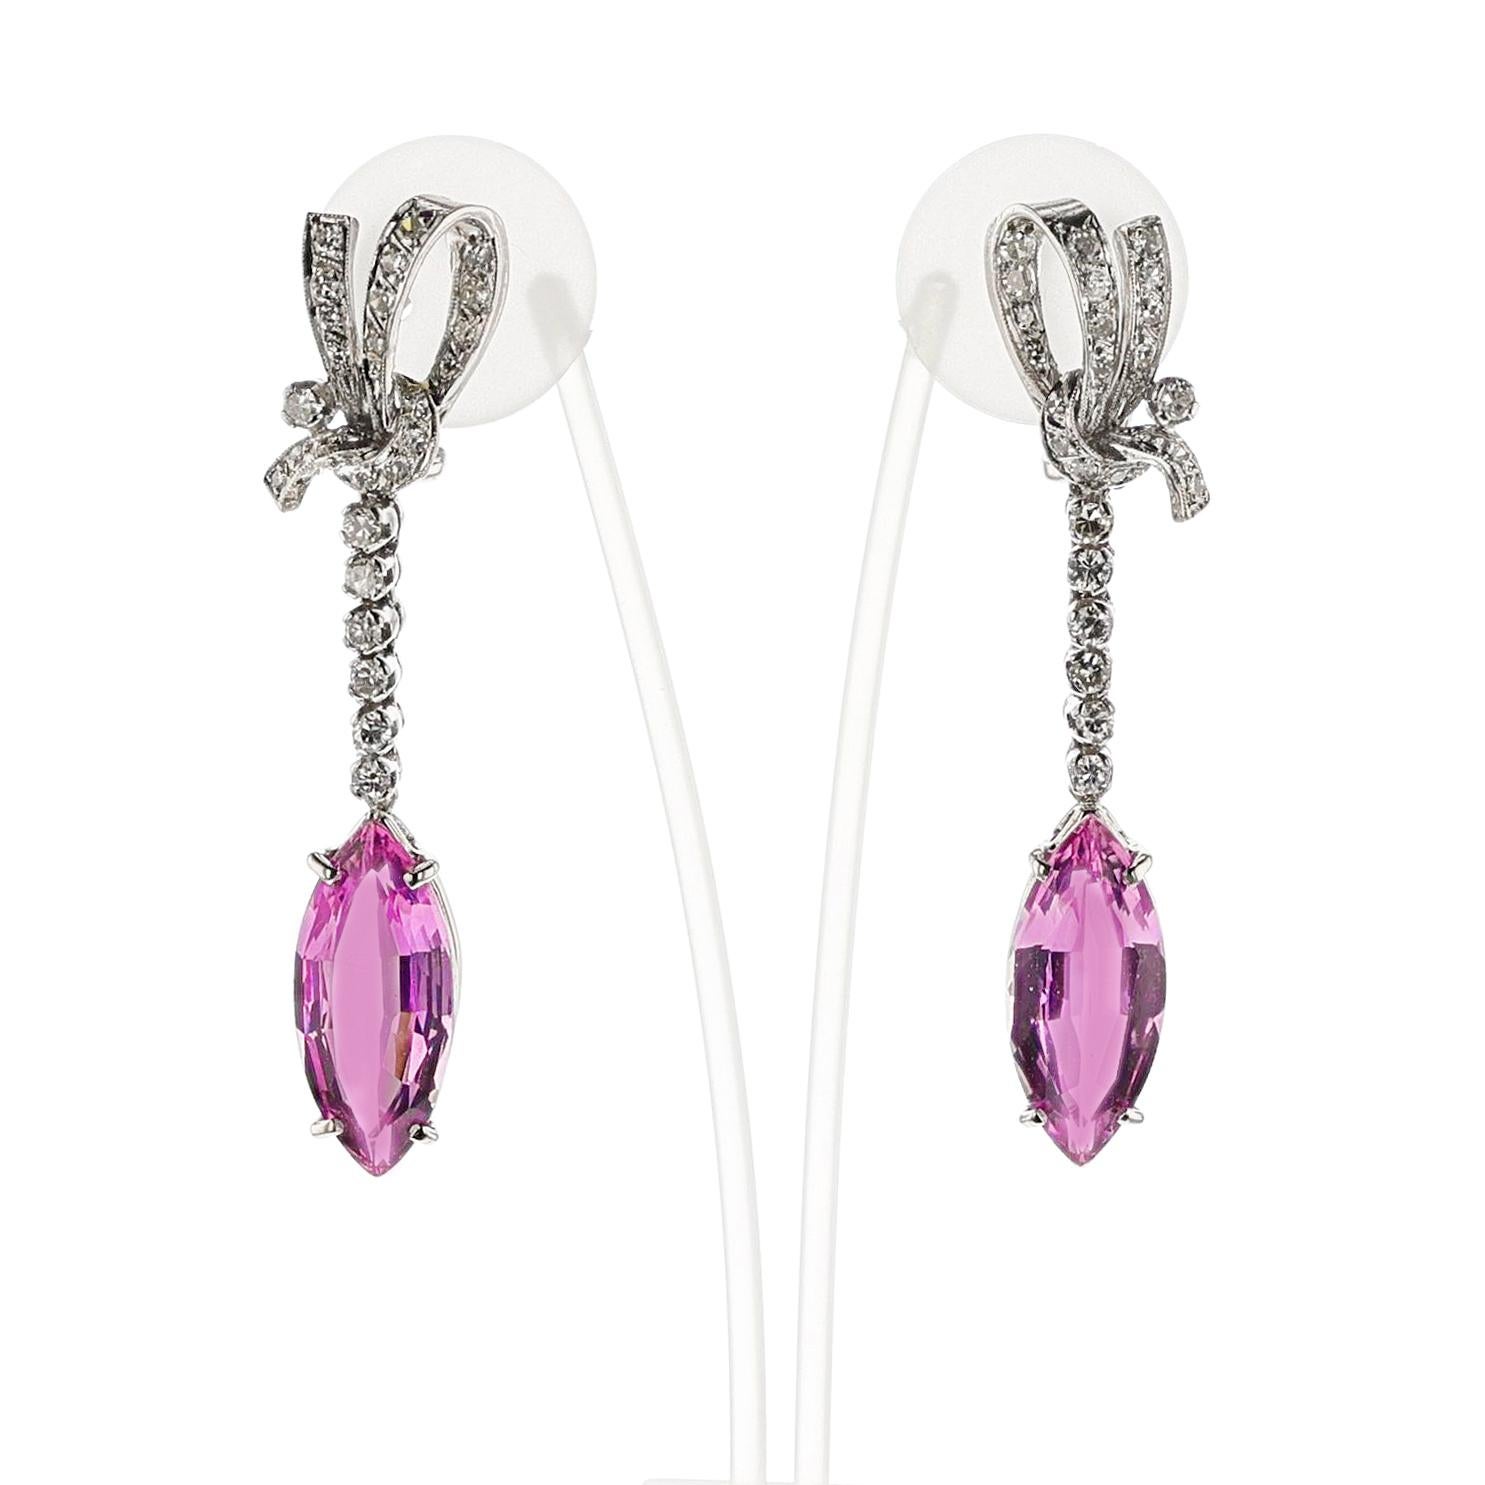 A pair of Art Deco AGL Certified Natural Marquise Pink Topaz and Diamond Earrings made in Platinum. The diamonds are single cut. The Natural Pink Topaz pair weighs 5.64 carats and 5.53 carats. Diamond weight approx. 3.00 carats. Earrings Length 2.10